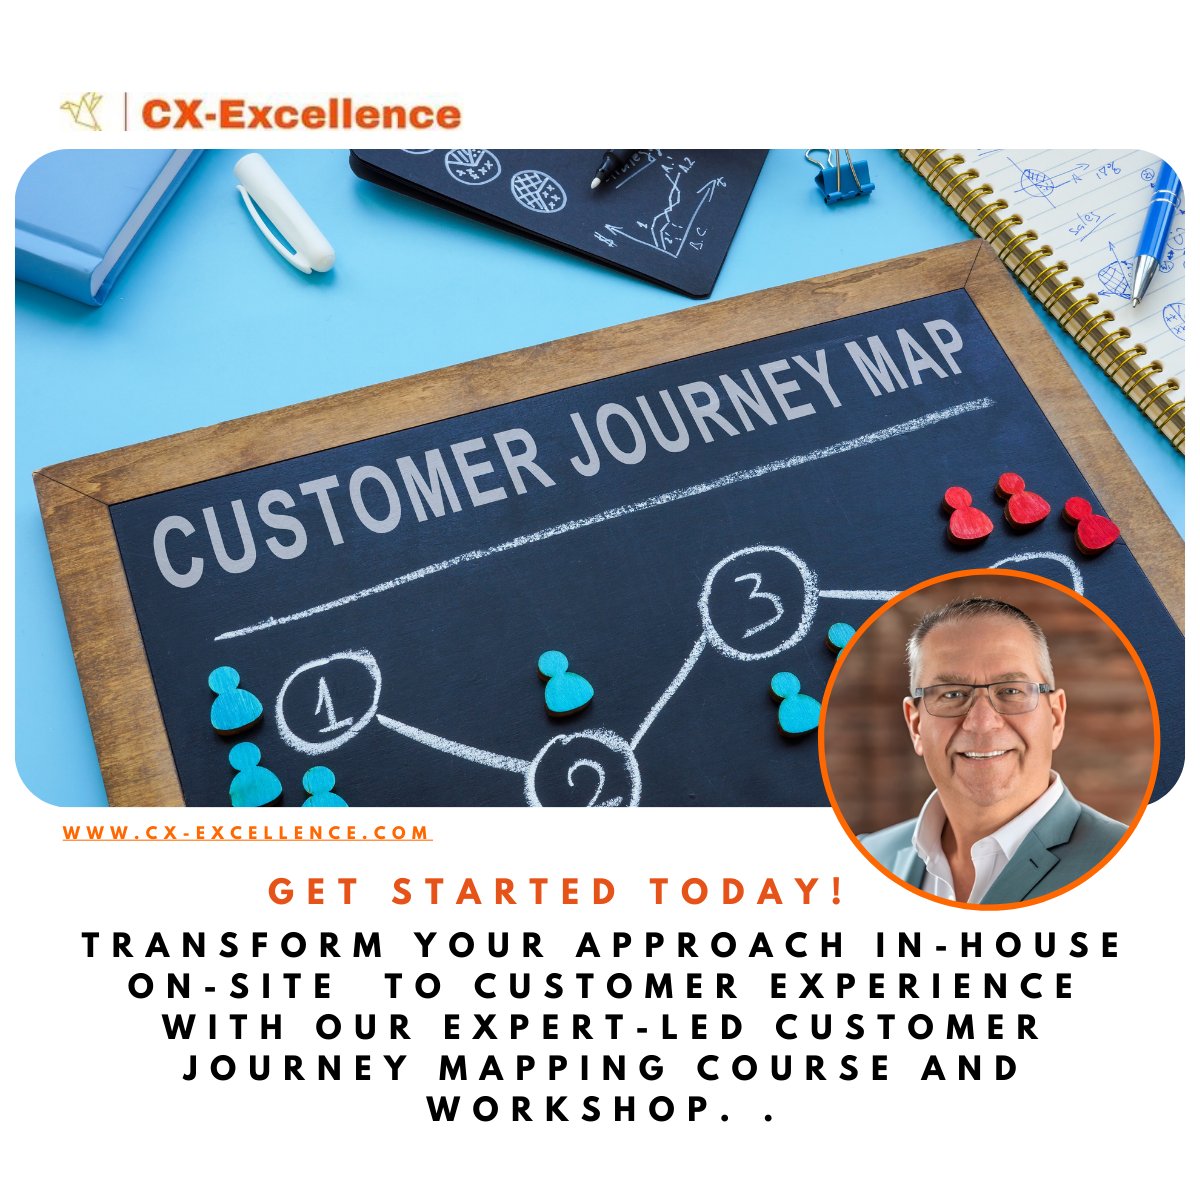 Contact us now at info@cx-excellence.com to secure a training program meticulously crafted for your organization's unique path to success.
#CustomerJourney #InteractiveLearning #PracticalExperience #CXStrategy #IndustryExperts